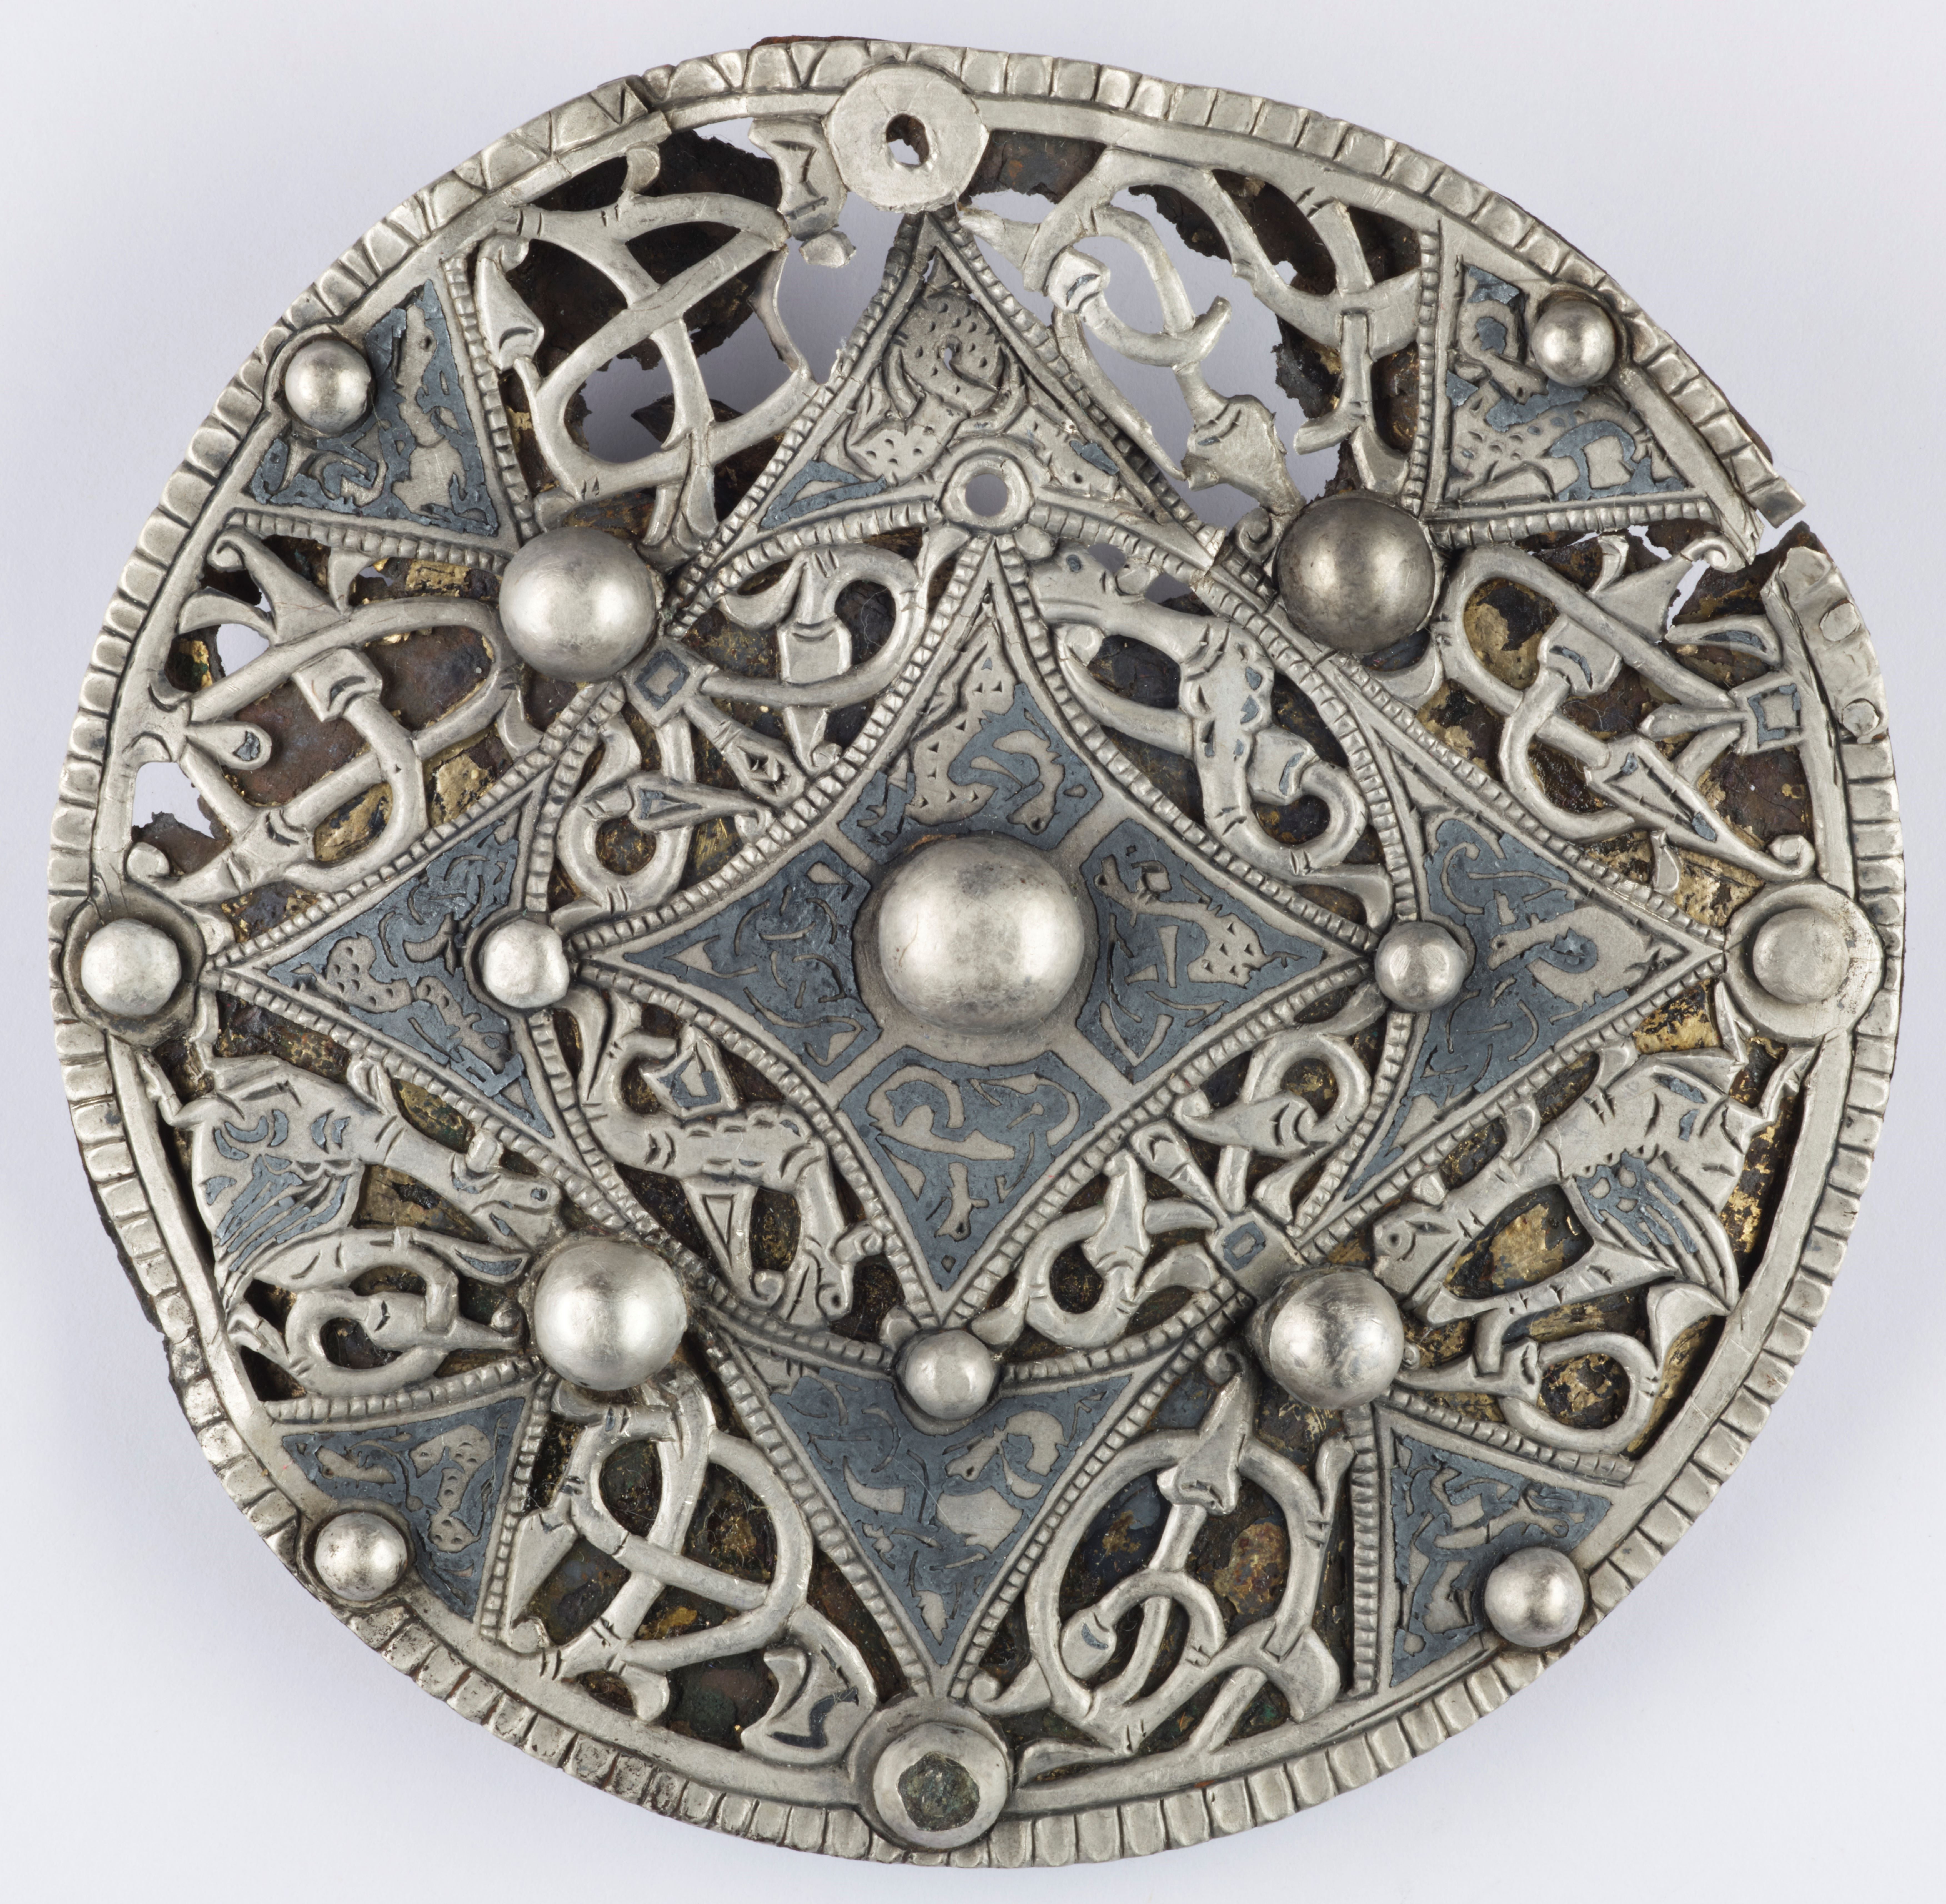 The high status Anglo-Saxon brooch found in a field near Cheddar, Somerset